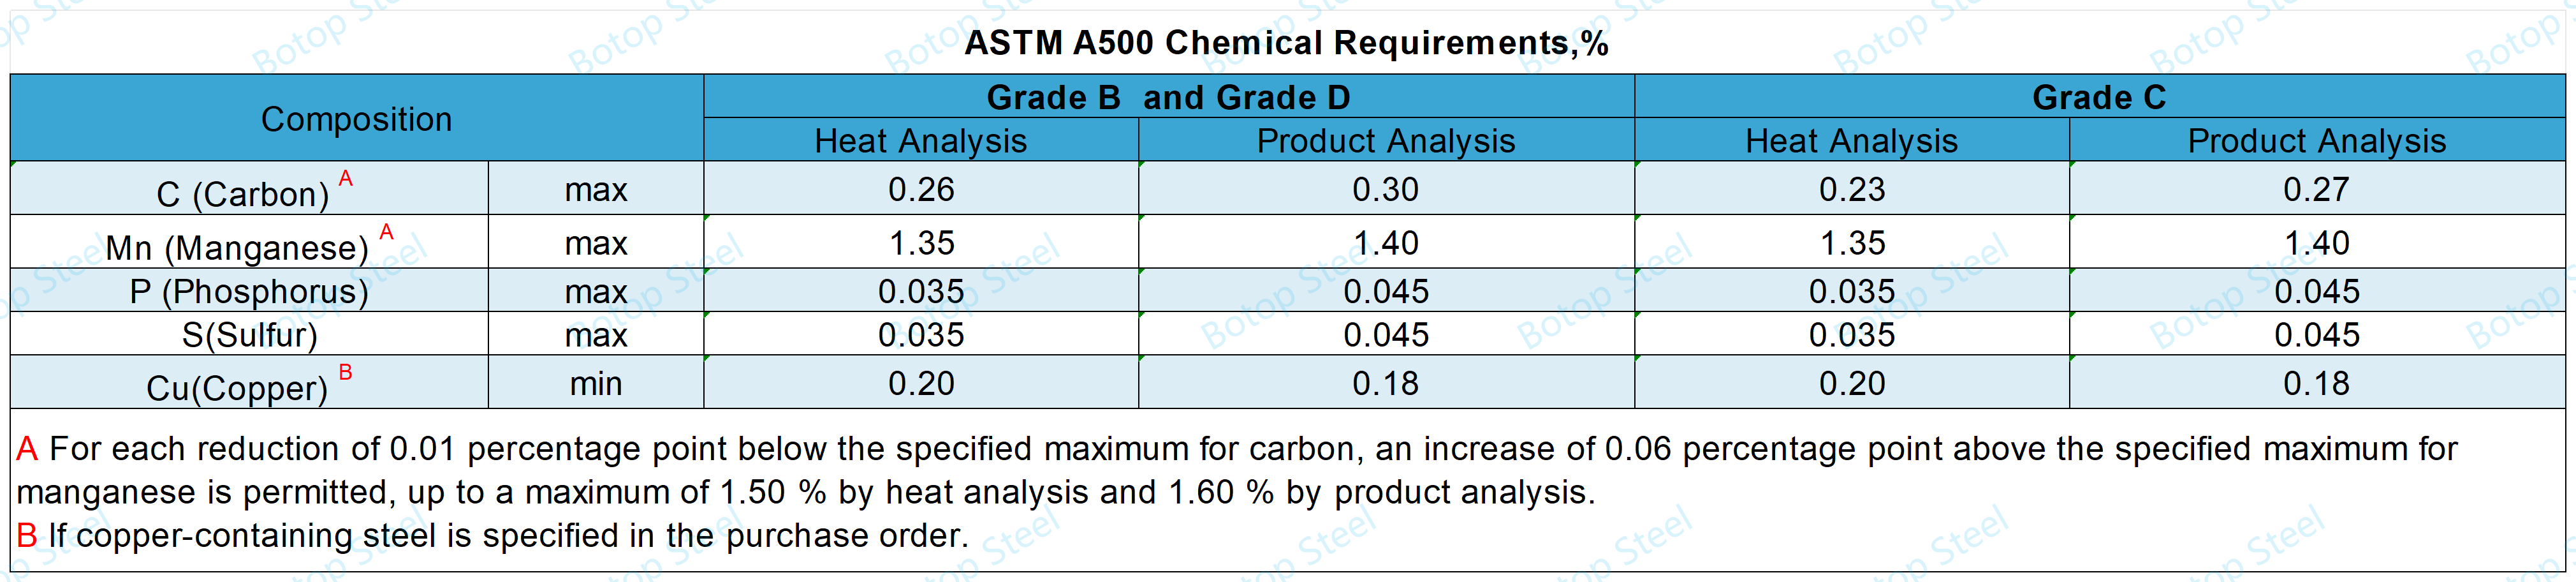 ASTM A500_Chemical Requirements